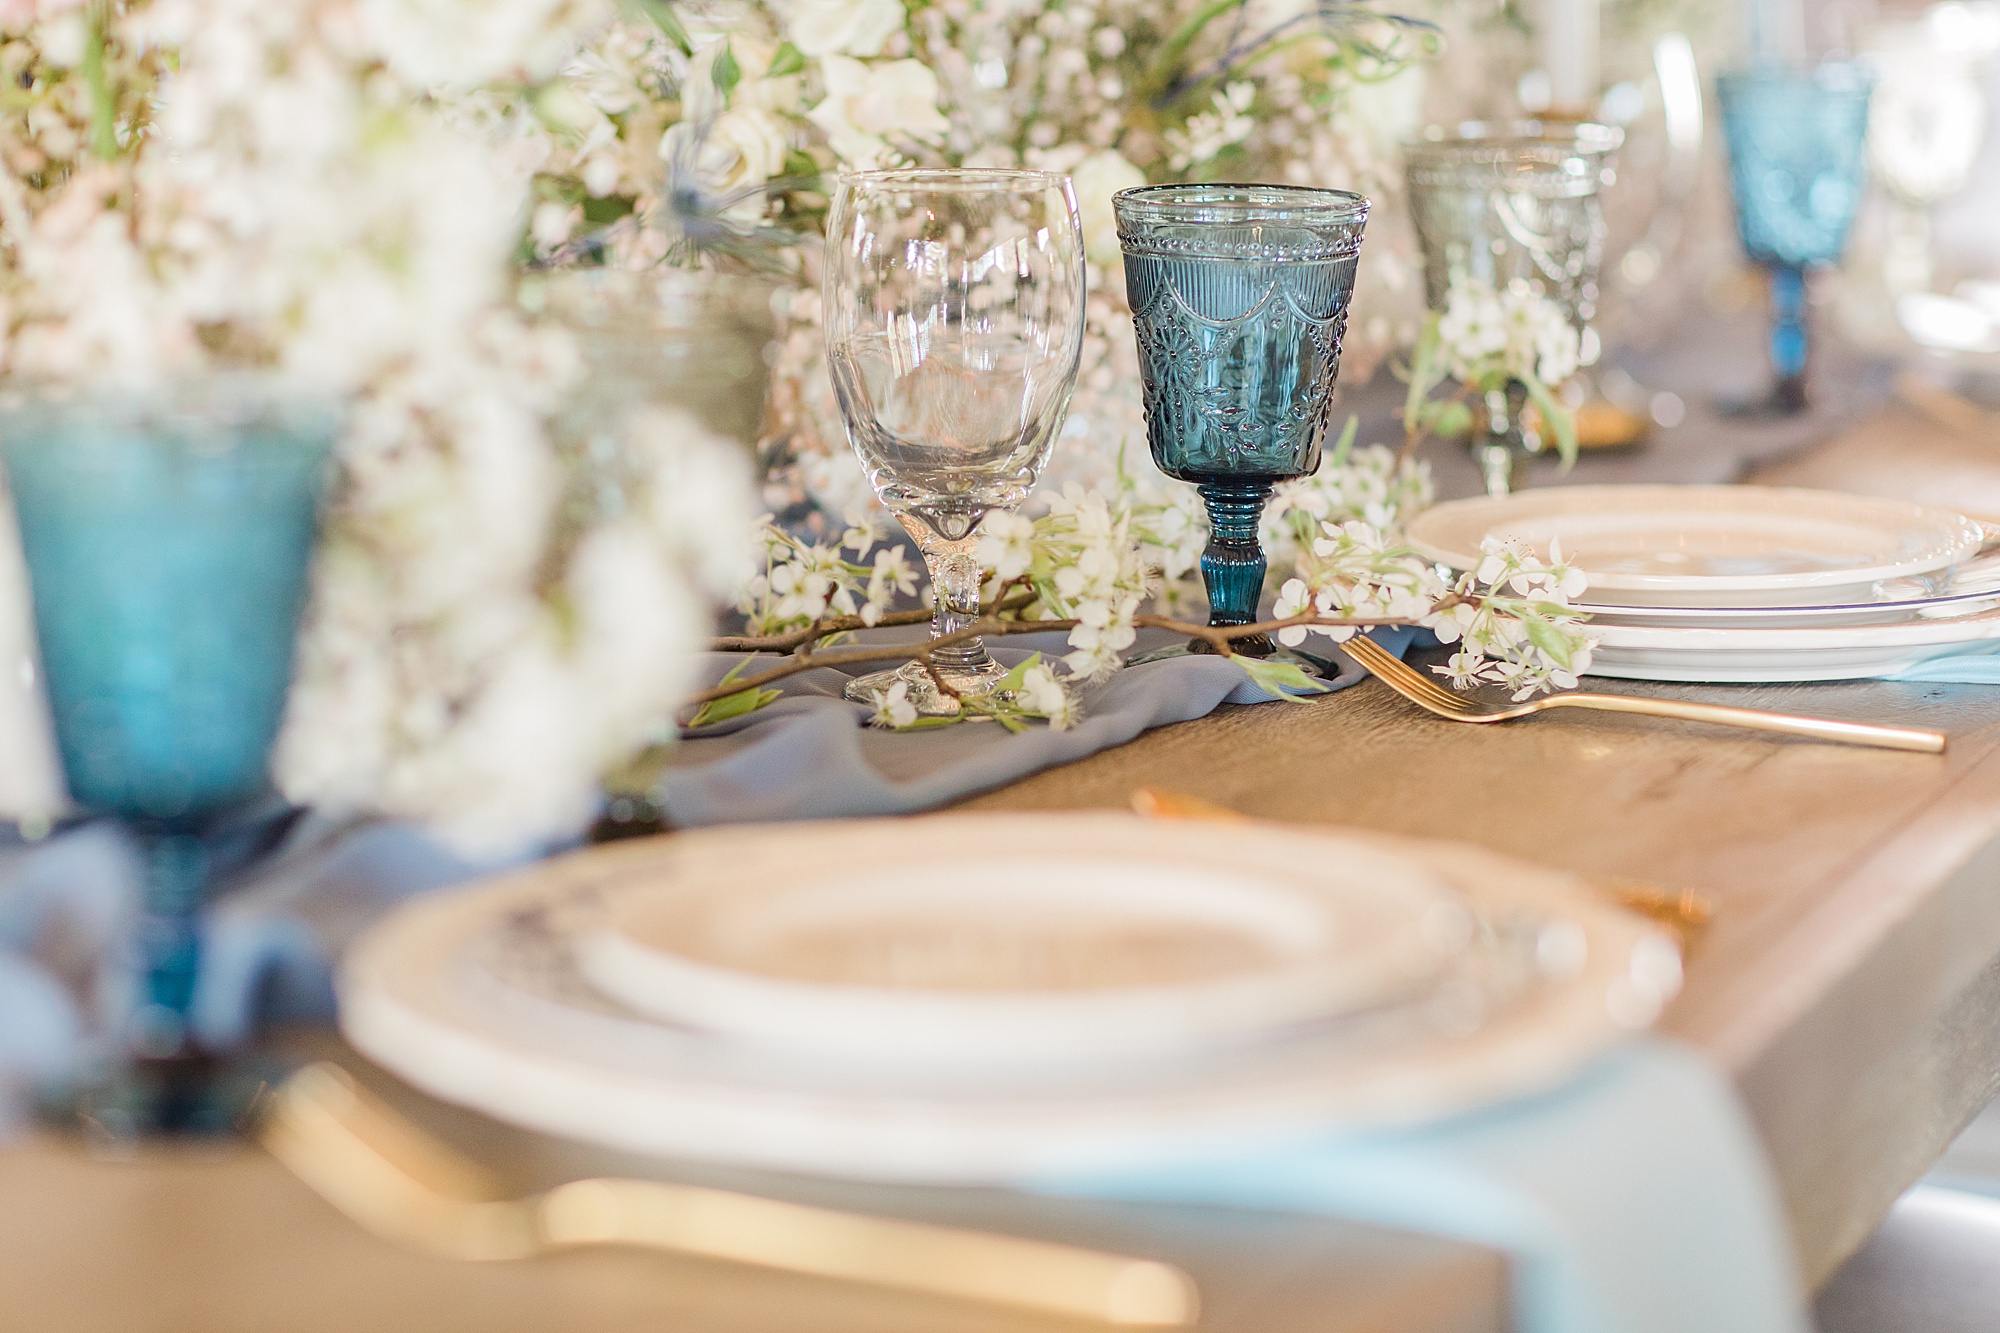 place settings with vintage blue glasses